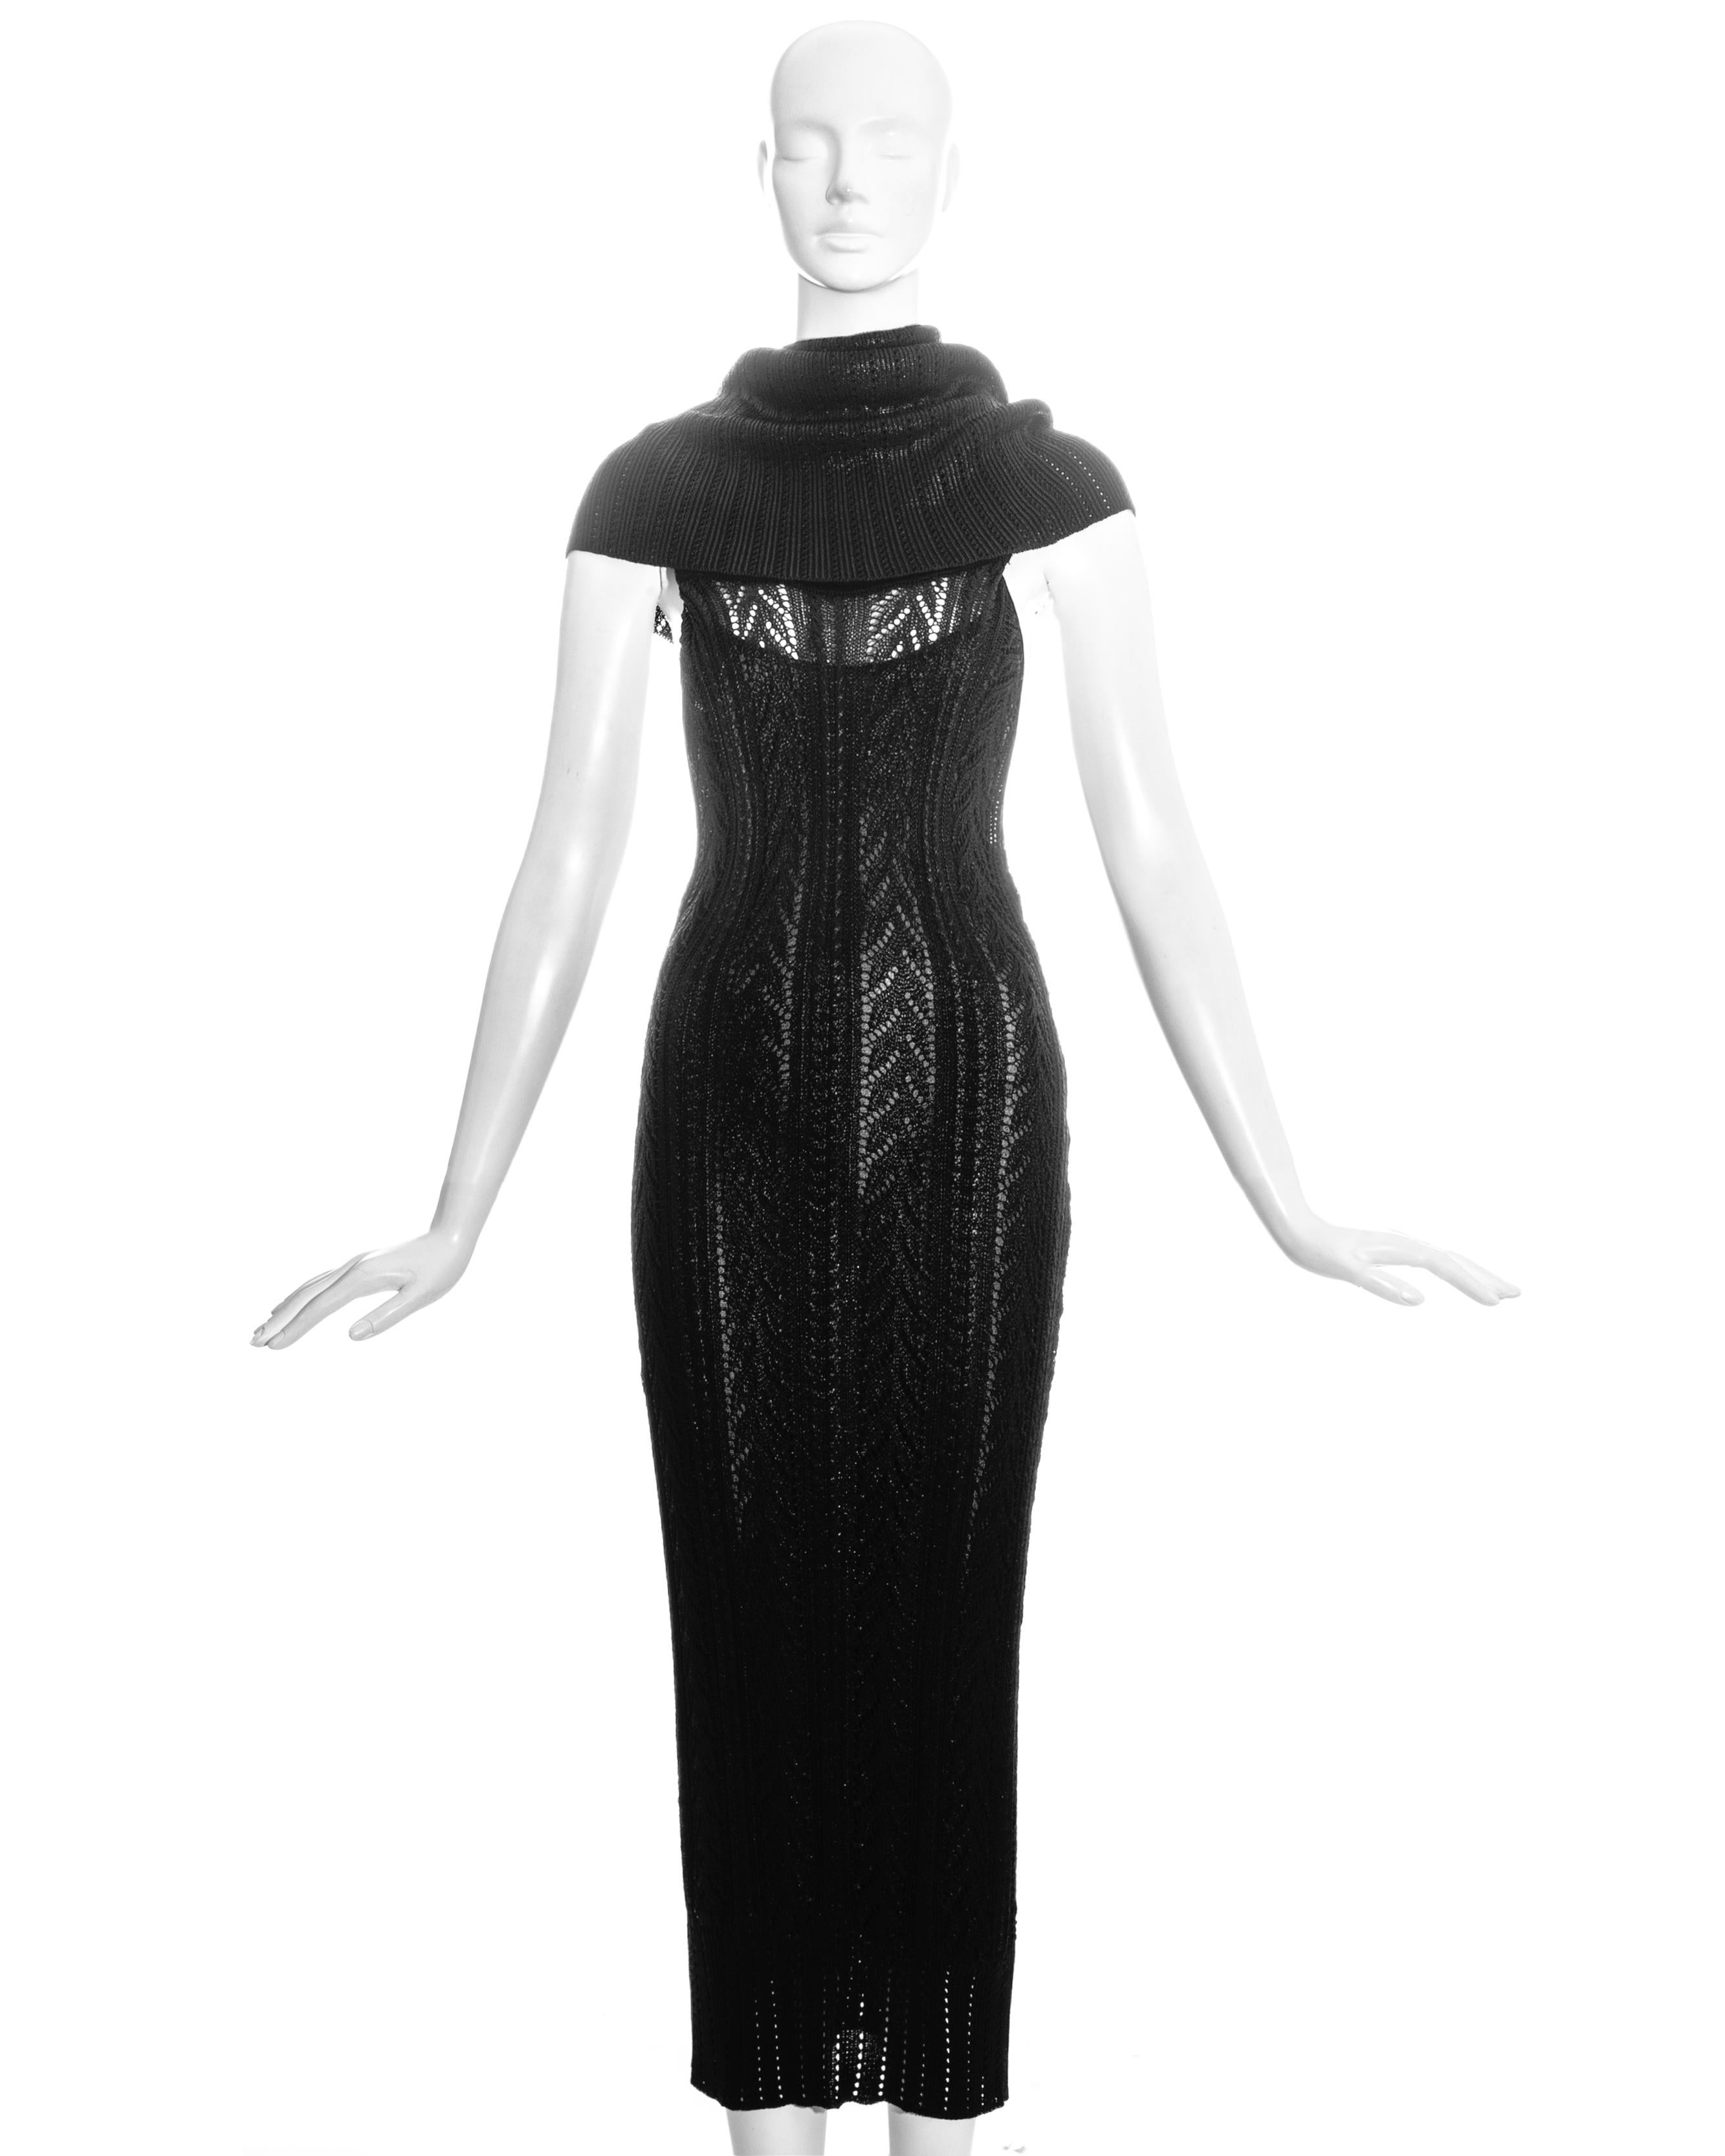 Christian Dior by John Galliano: black crochet-knit evening dress with metallic lurex underlay, low back and large turtleneck collar.

Fall-Winter 1999